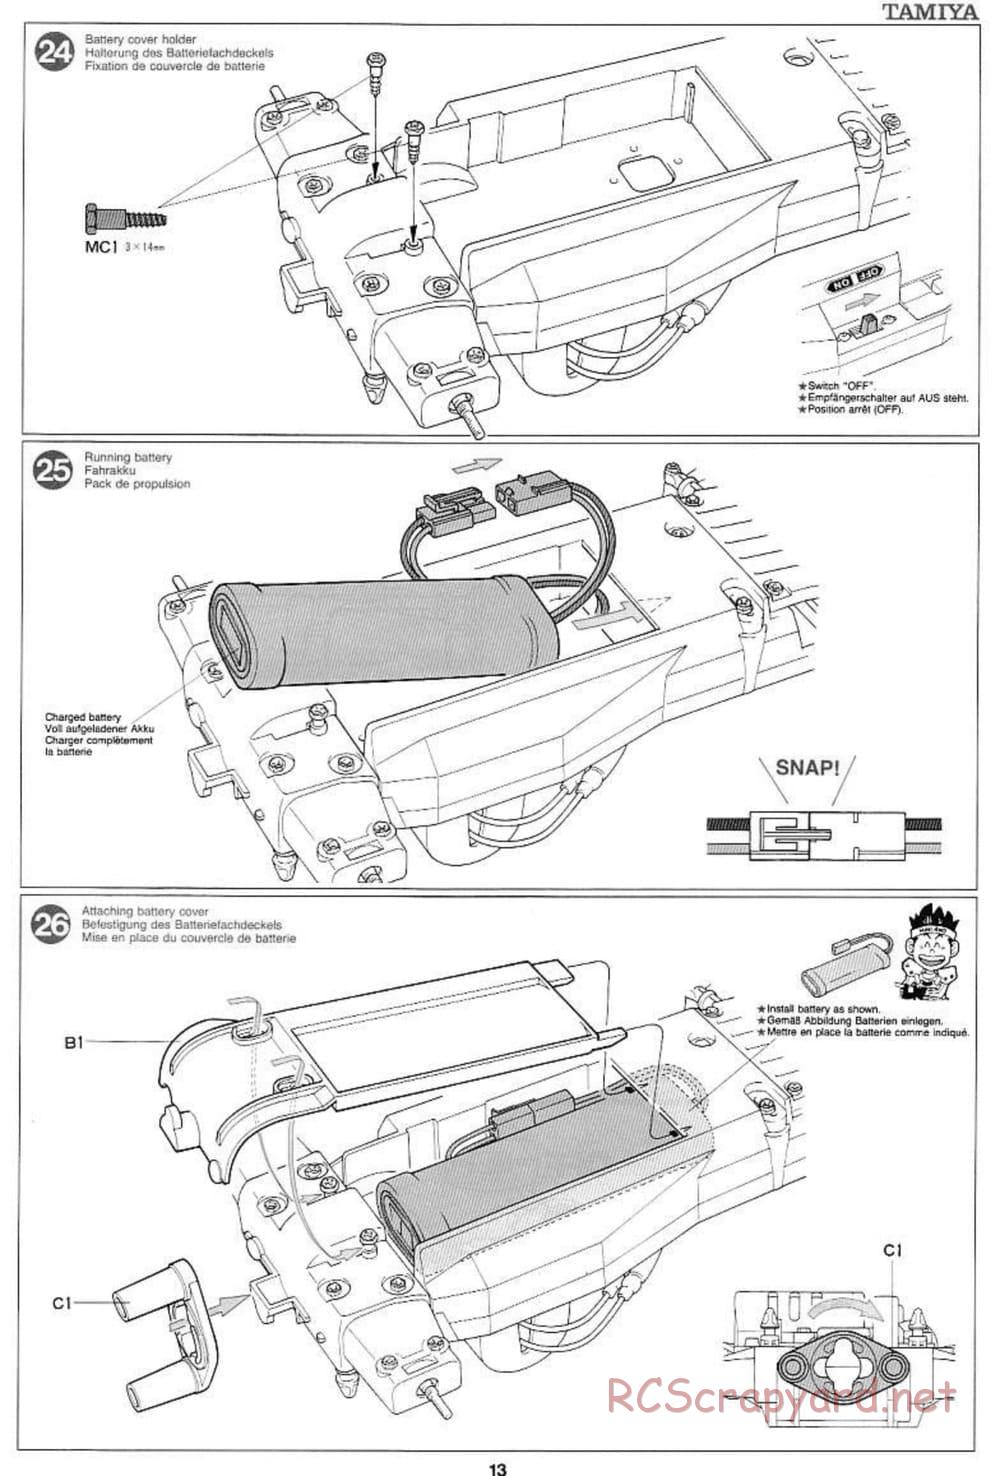 Tamiya - Wild Ceptor - Boy's 4WD Chassis - Manual - Page 13